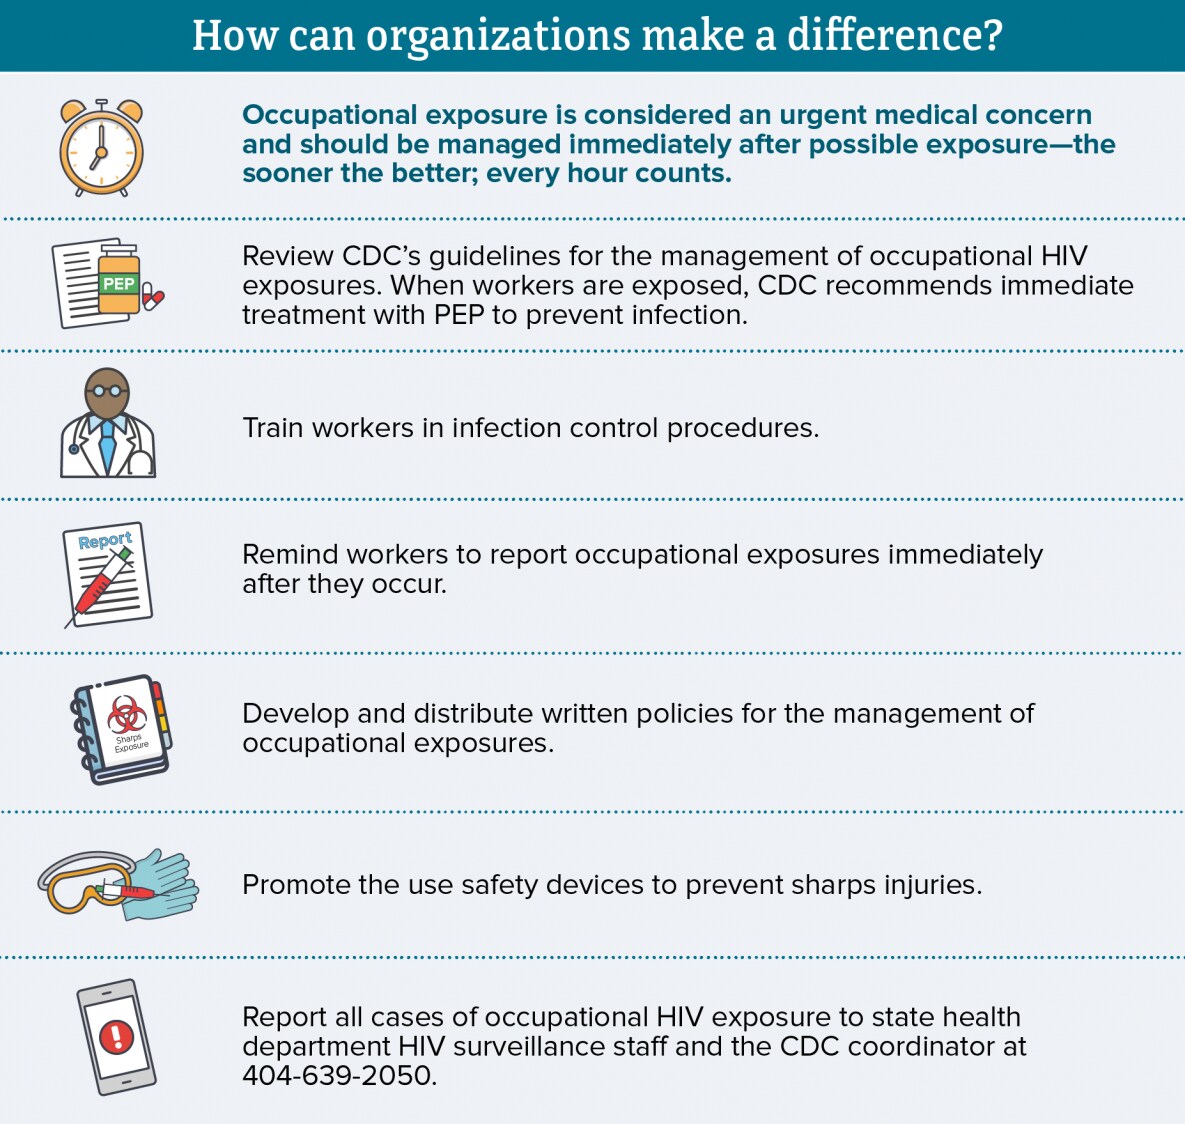 How can organizations make a difference?